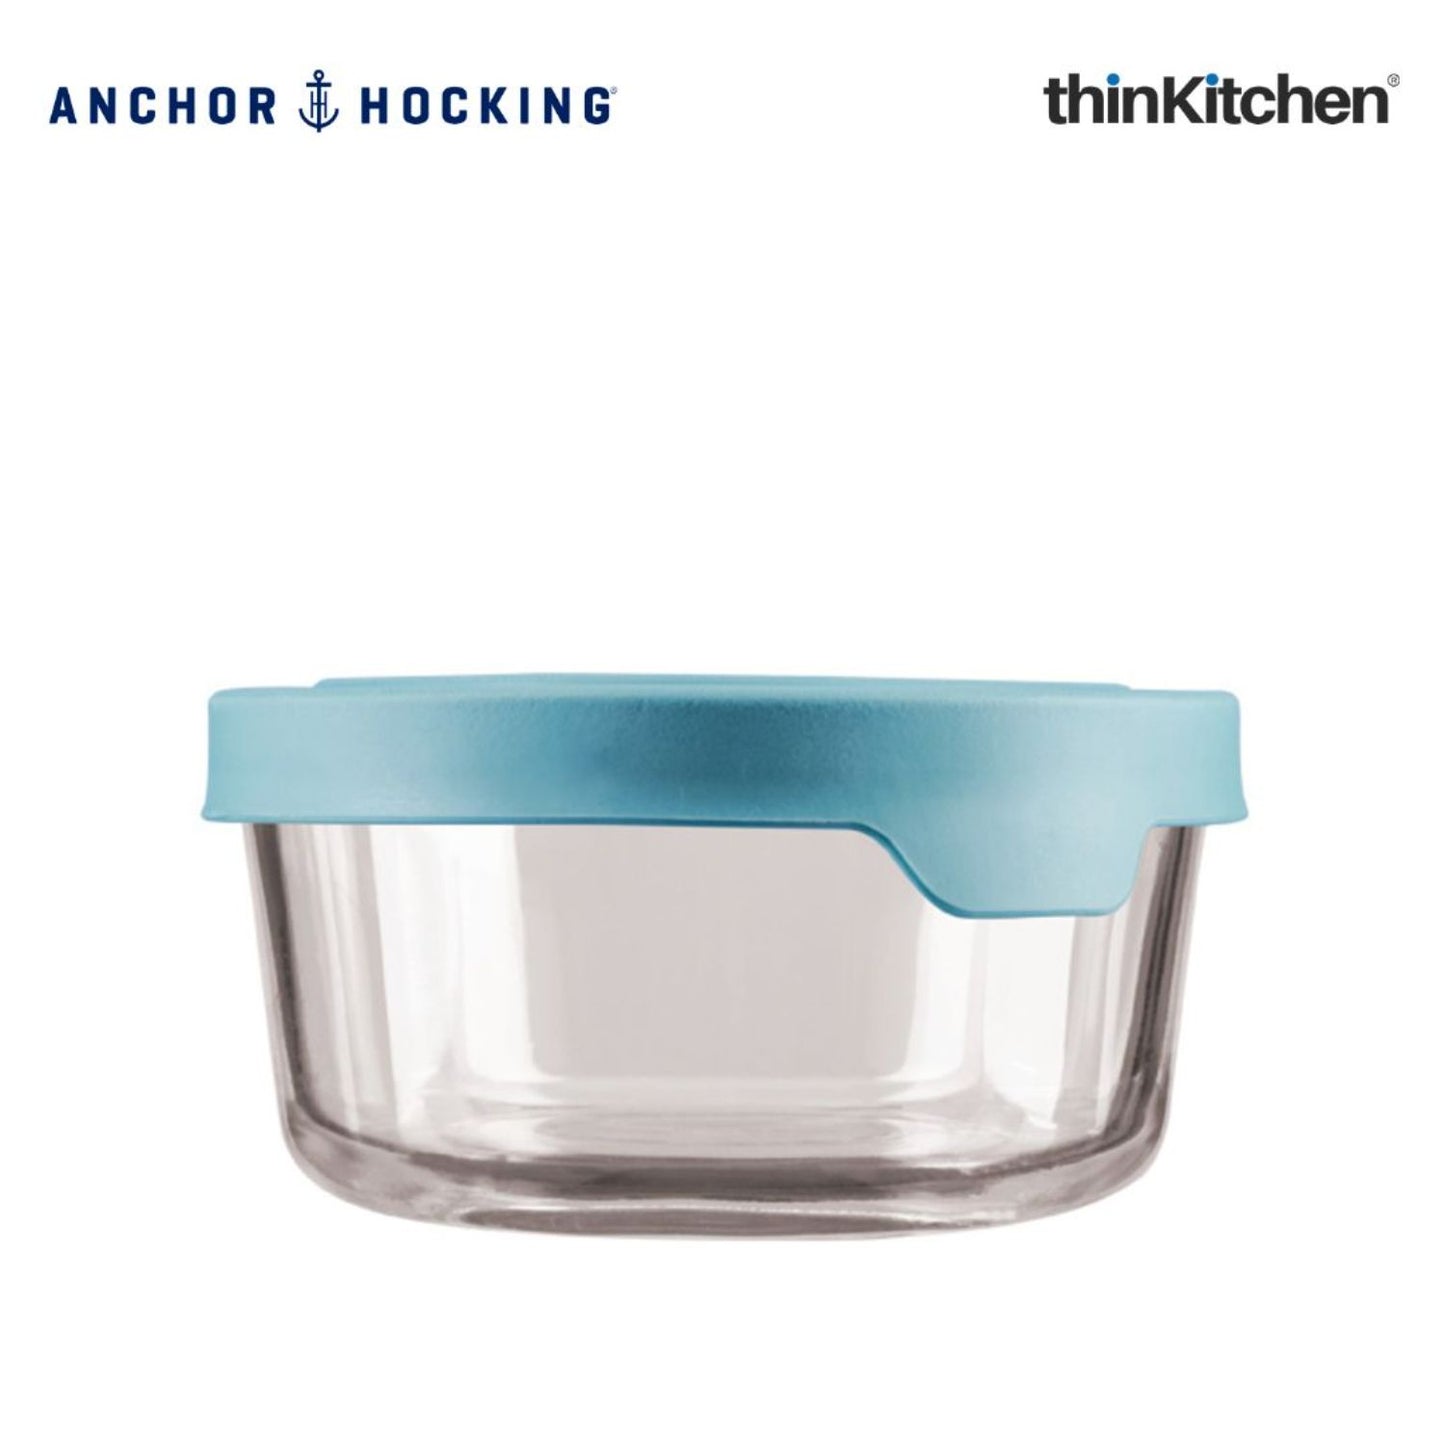 Anchor Hocking Trueseal Lid Food Storage Container - 700g